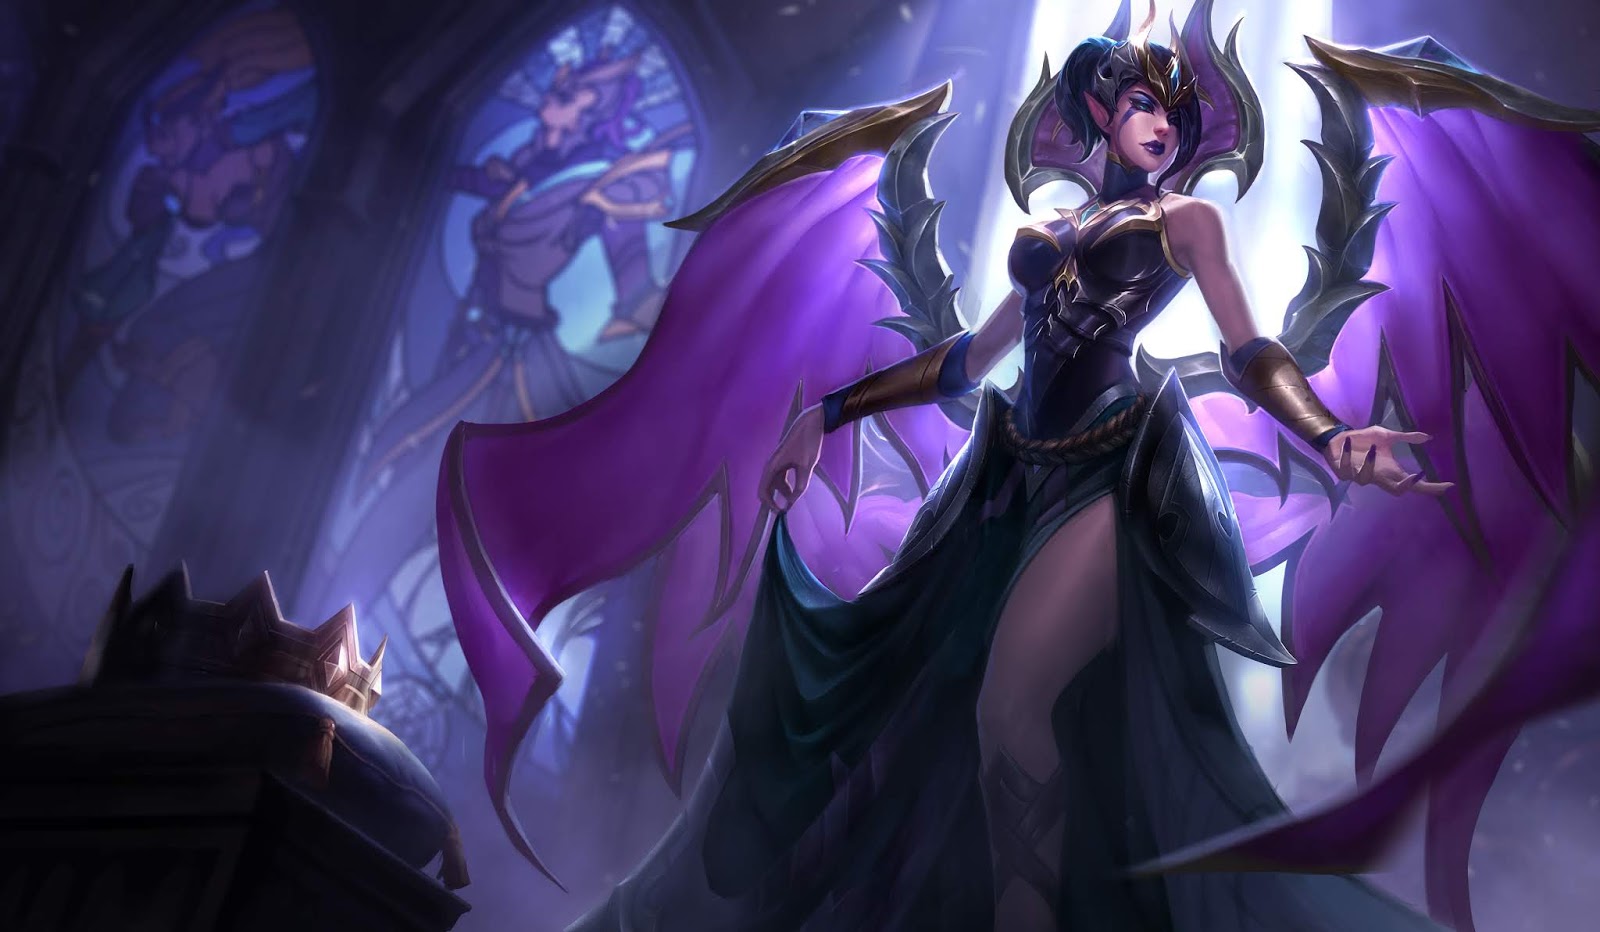 Surrender at 20: Champion Update: Kayle & Morgana, the Righteous and